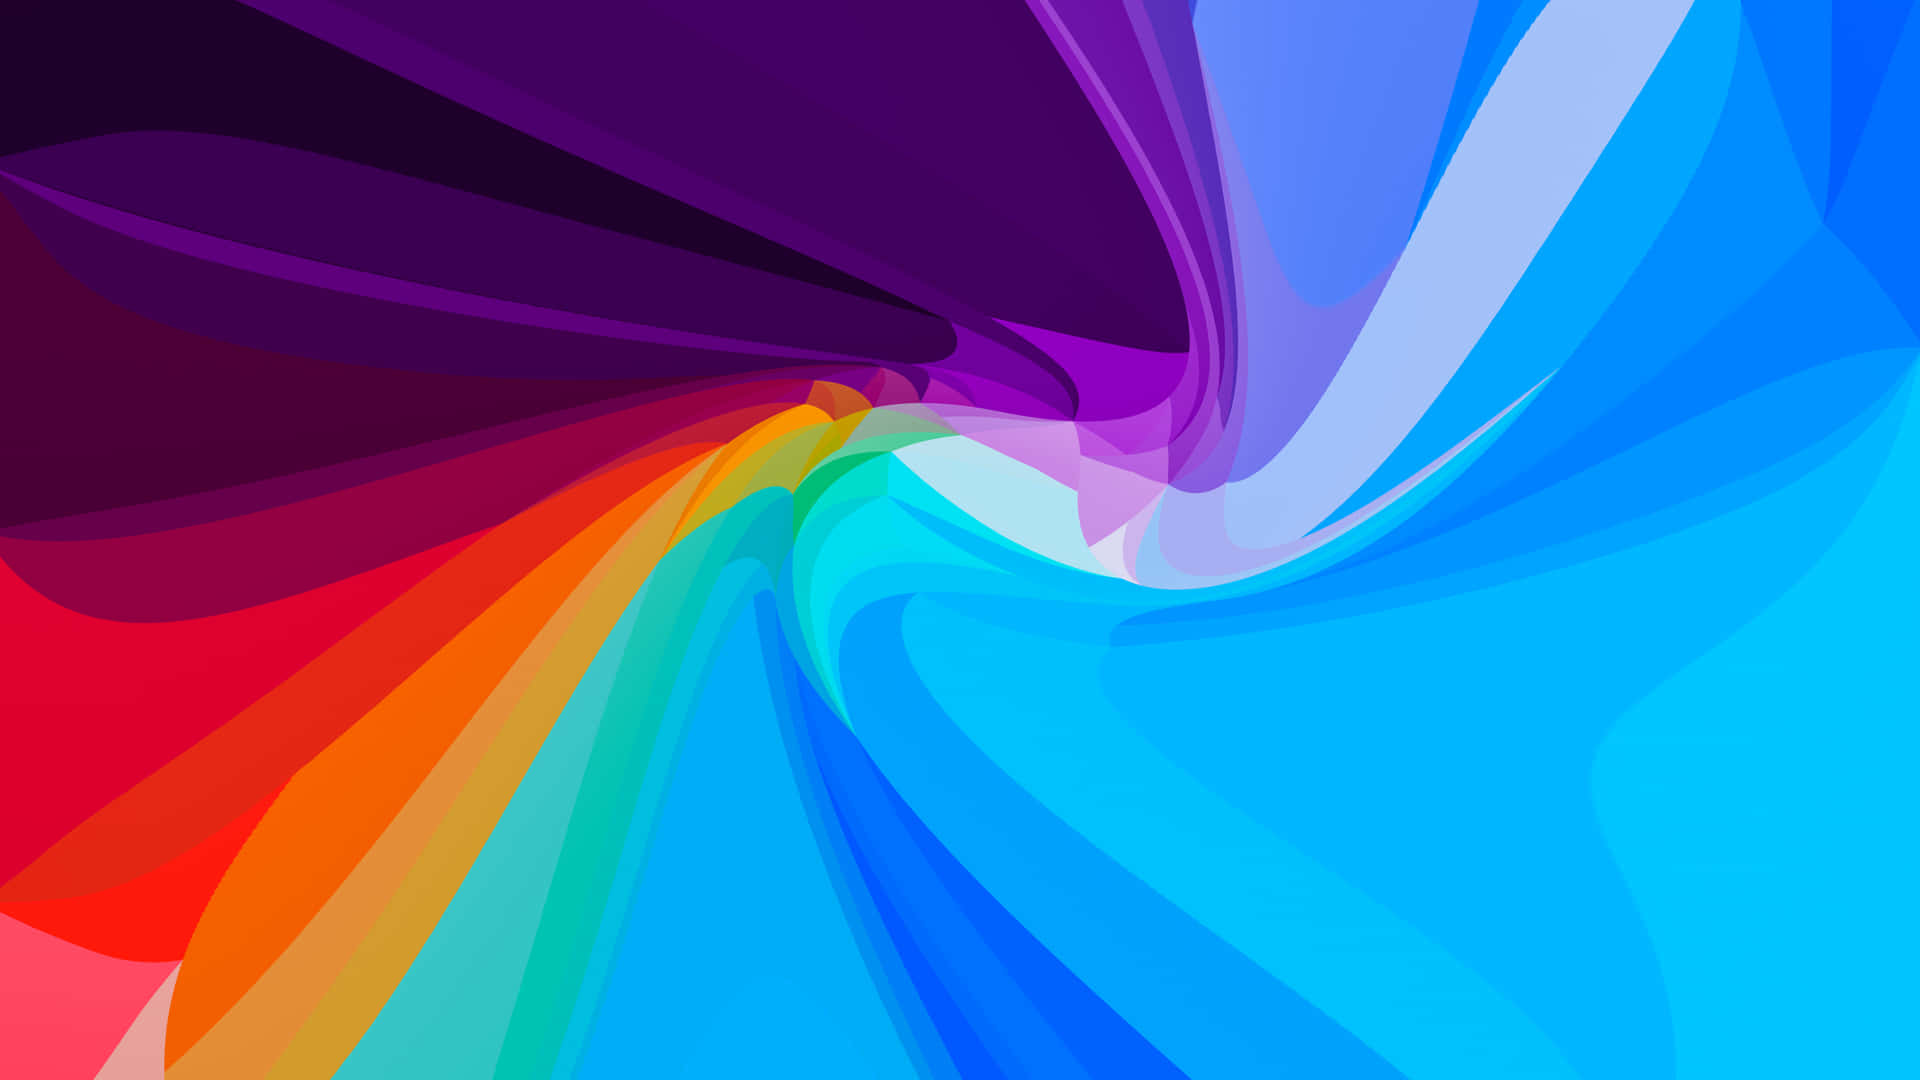 Enjoy The Vibrancy Of Colorful Abstract Art Background